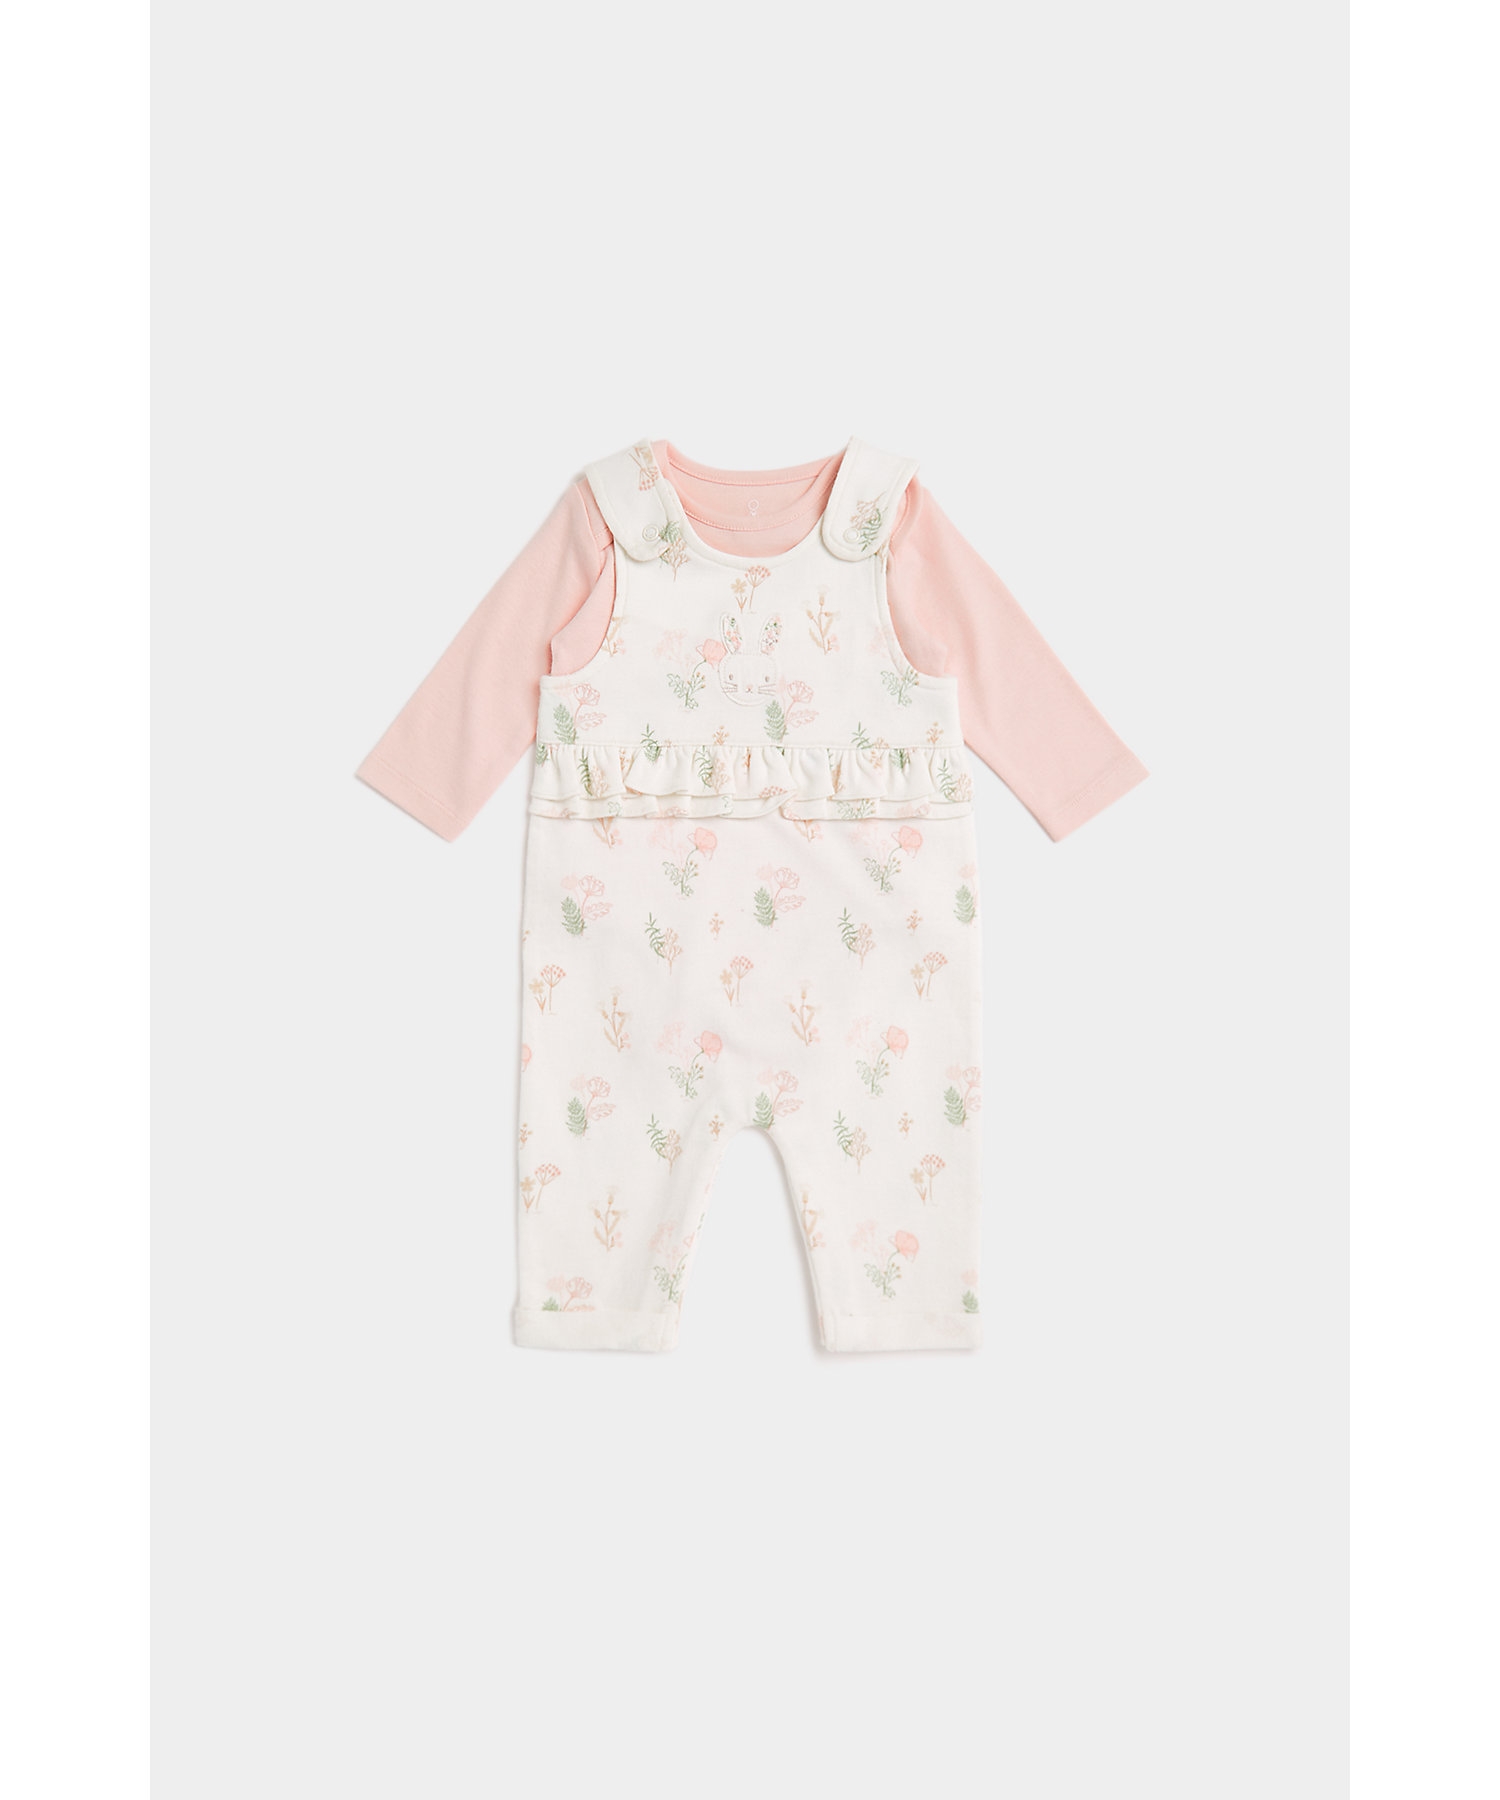 Mothercare | Girls Full Sleeves Dungaree Boyysuit Set -Multicolor